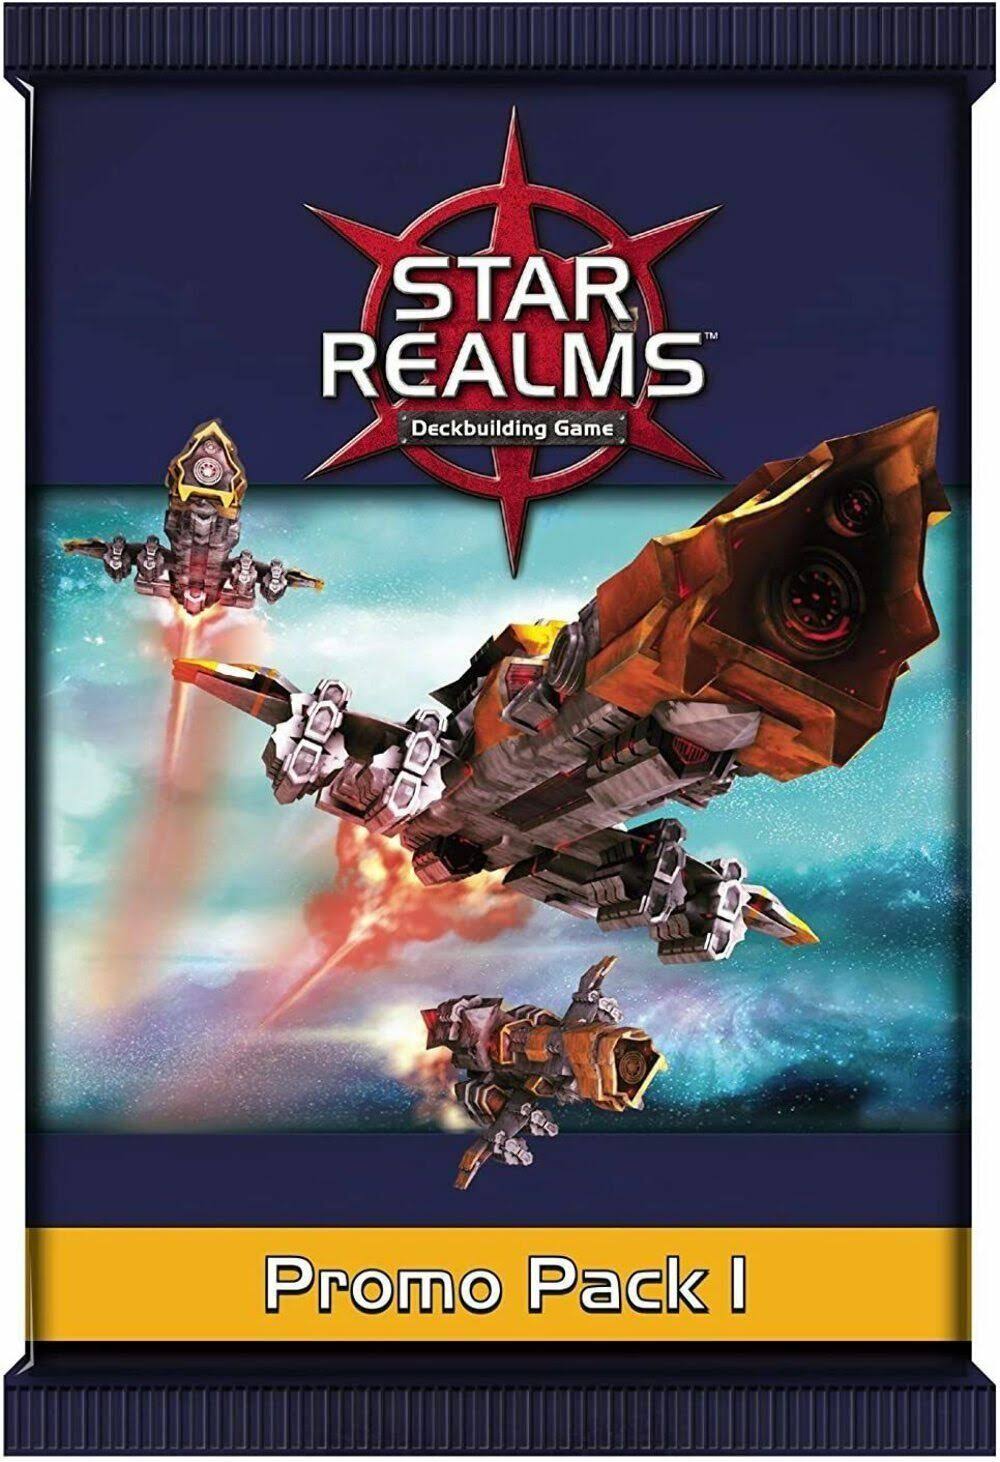 STAR REALMS PROMO PACK 1